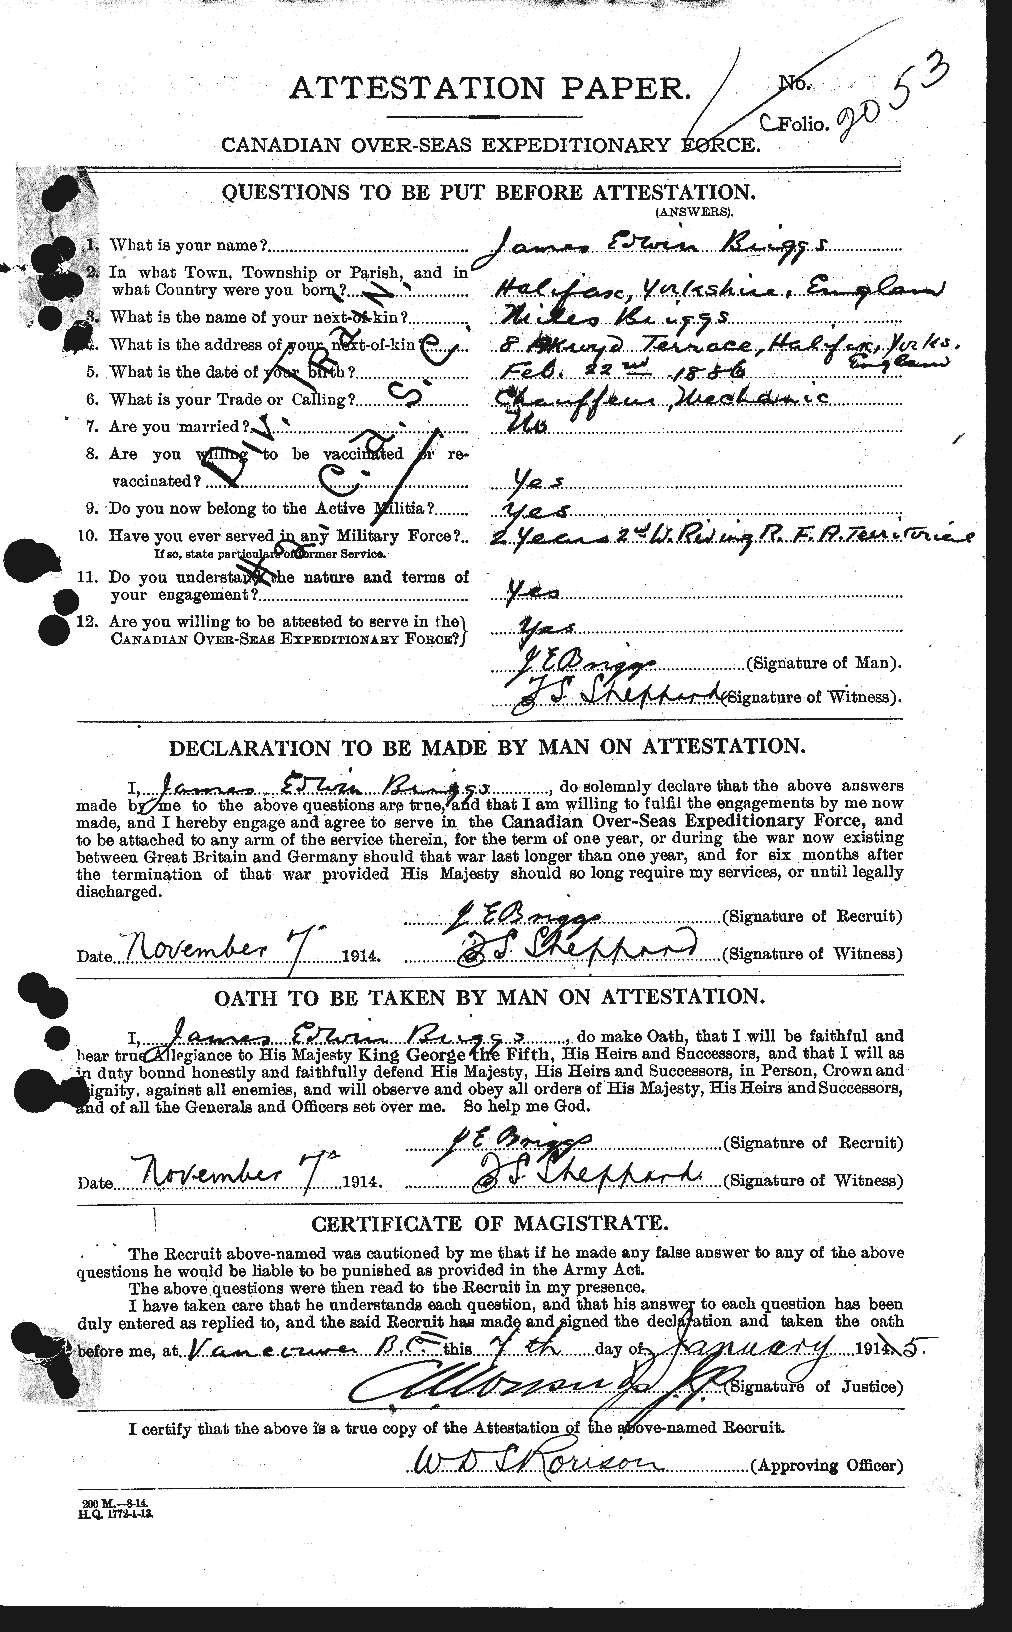 Personnel Records of the First World War - CEF 264040a